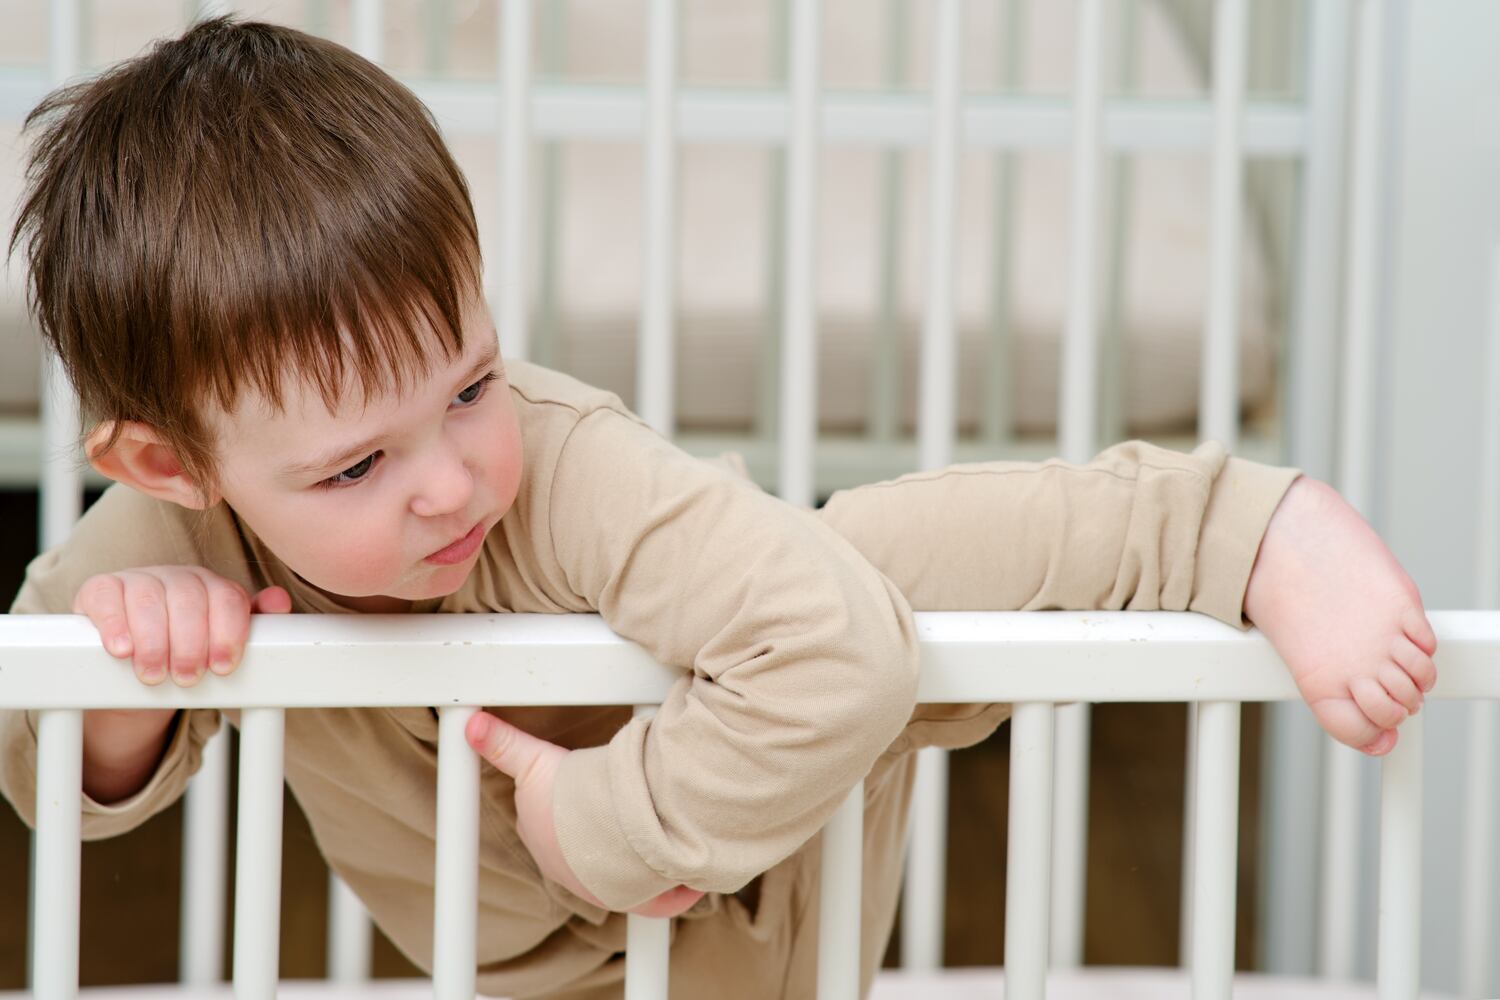 Toddlers climb out of crib due to several reasons